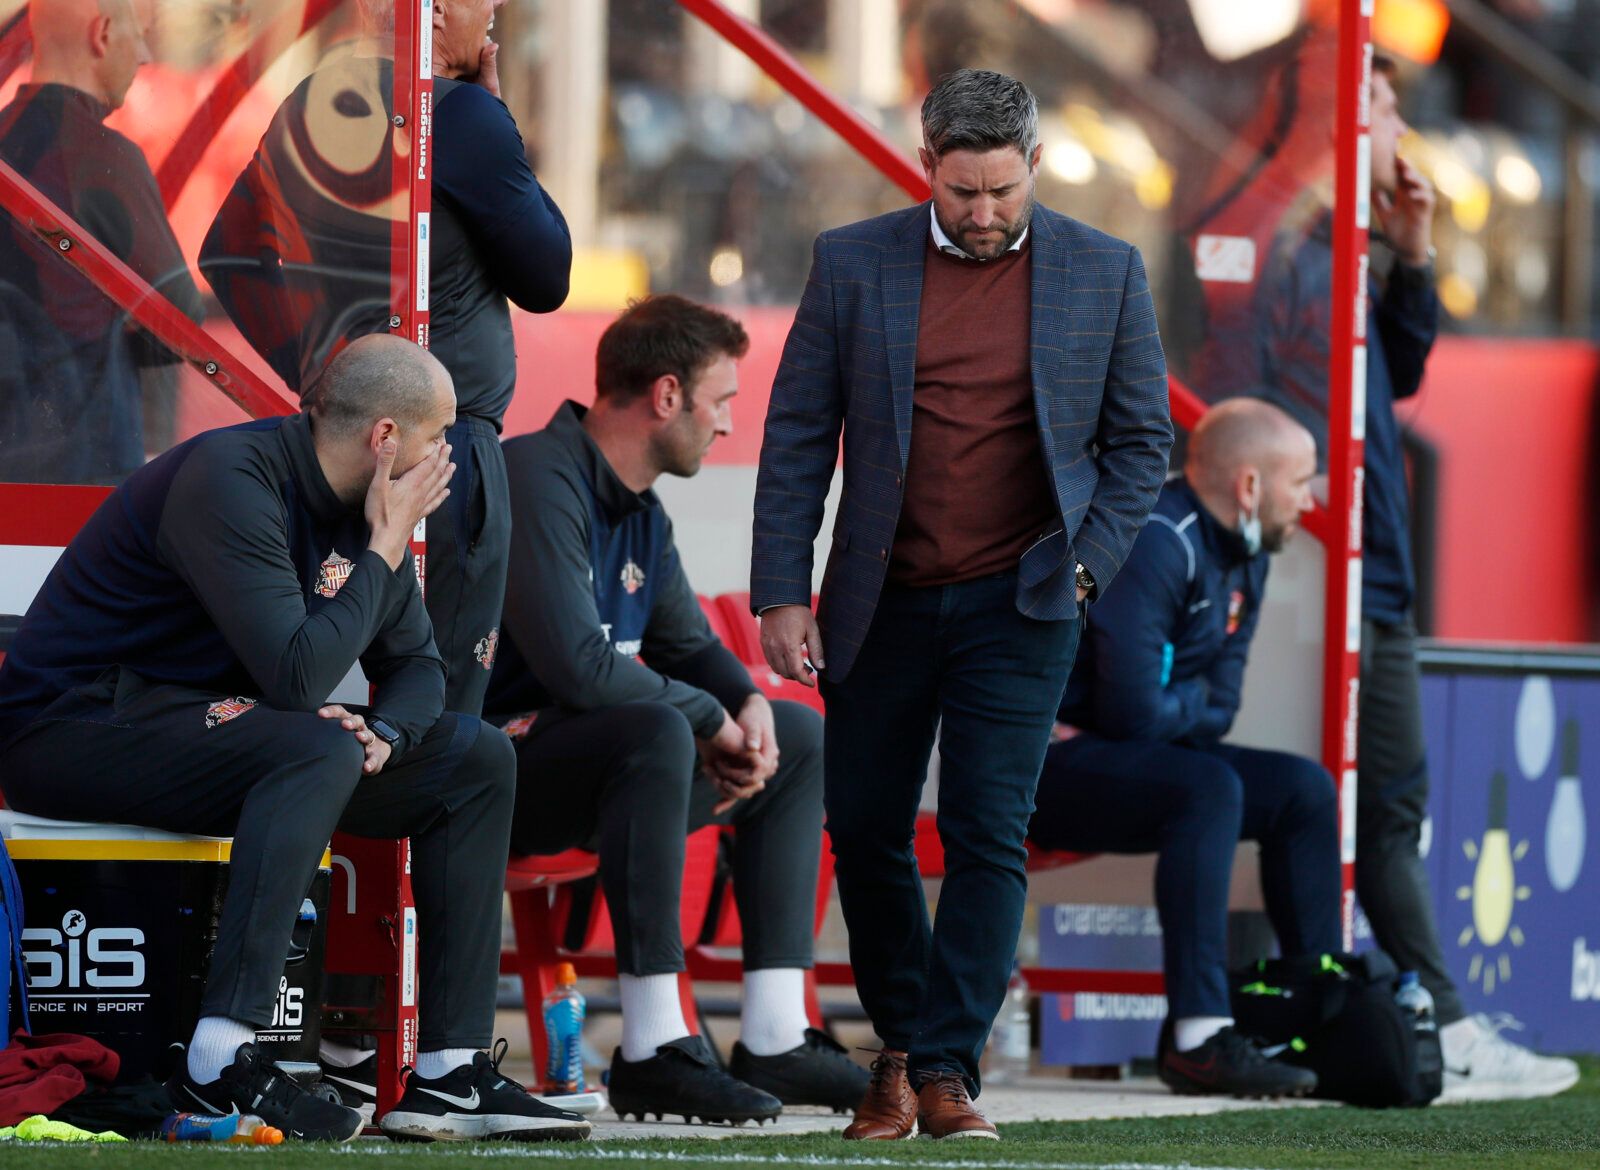 Soccer Football - League One - Play-Off Semi Final First Leg - Lincoln City v Sunderland - Sincil Bank, Lincoln, Britain - May 19, 2021 Sunderland's manager Lee Johnson reacts during the match Action Images/Lee Smith EDITORIAL USE ONLY. No use with unauthorized audio, video, data, fixture lists, club/league logos or 'live' services. Online in-match use limited to 75 images, no video emulation. No use in betting, games or single club /league/player publications.  Please contact your account repre